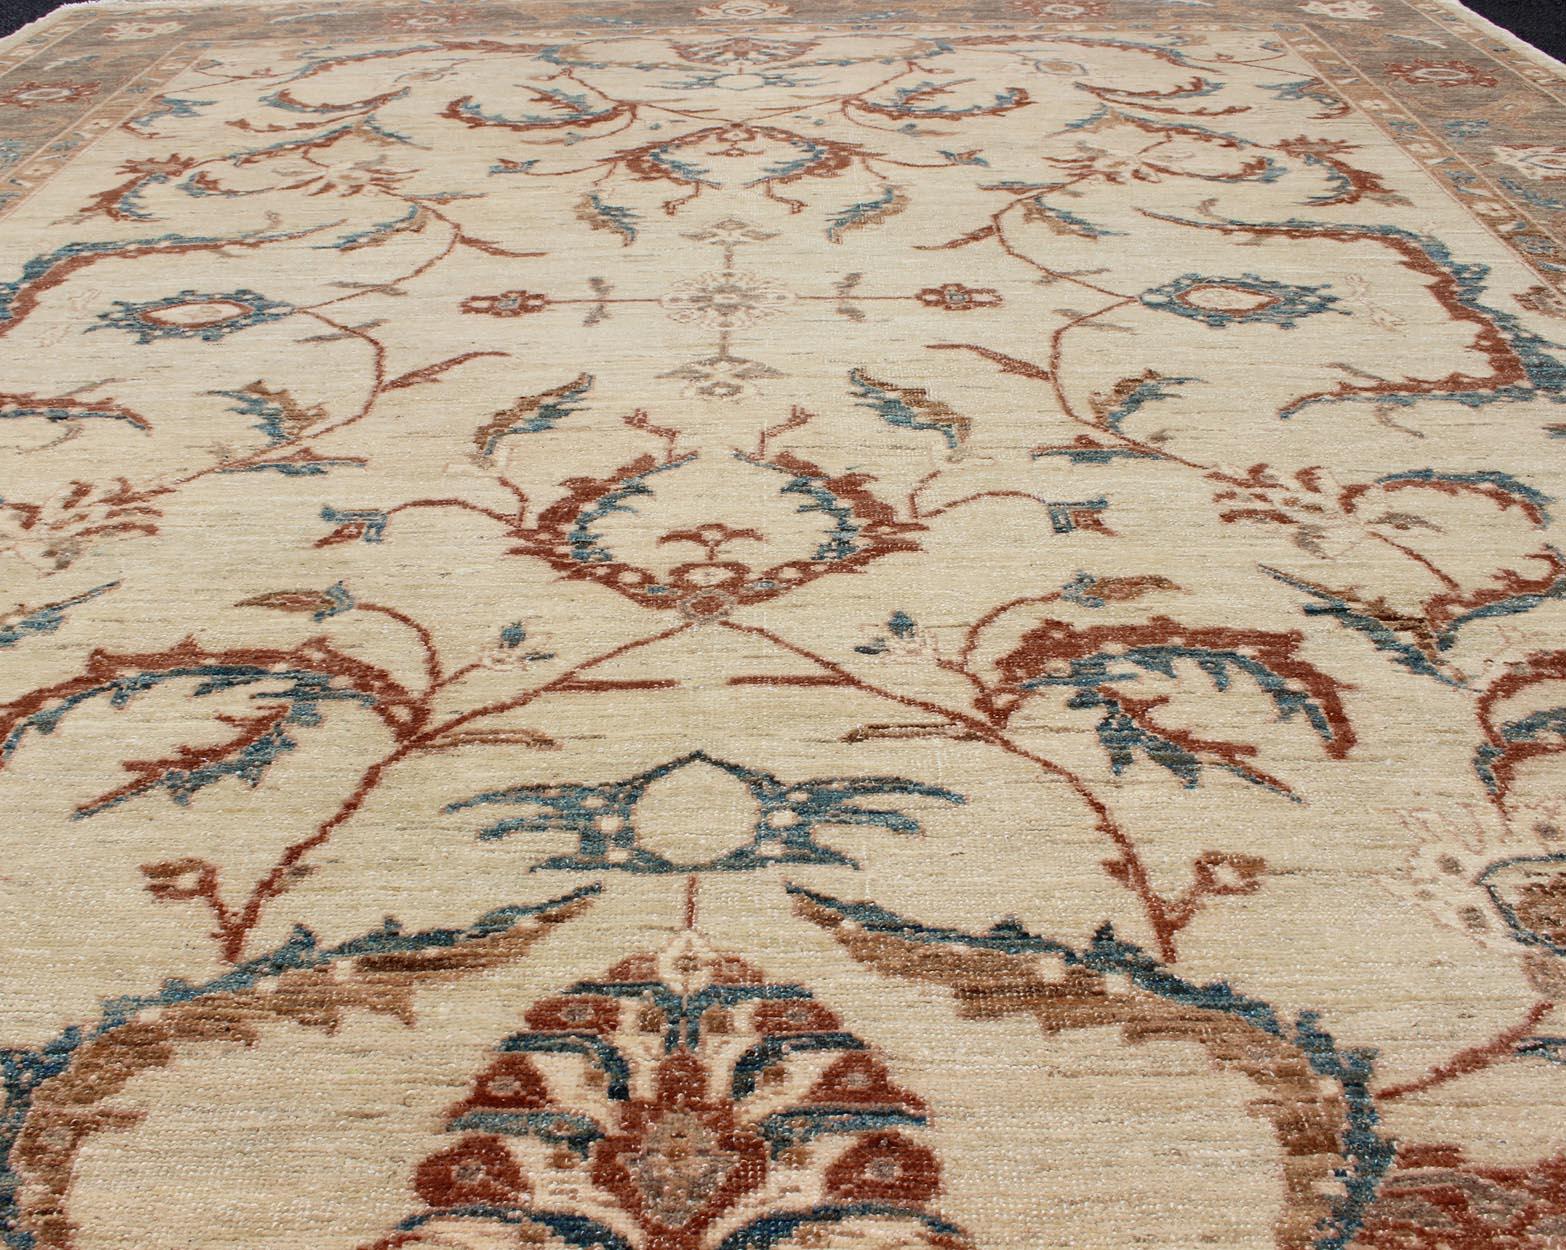 20th Century Fine Afghanistan Made Rug in Earthy Tones of Brown, Taupe, Blue, and Coral For Sale